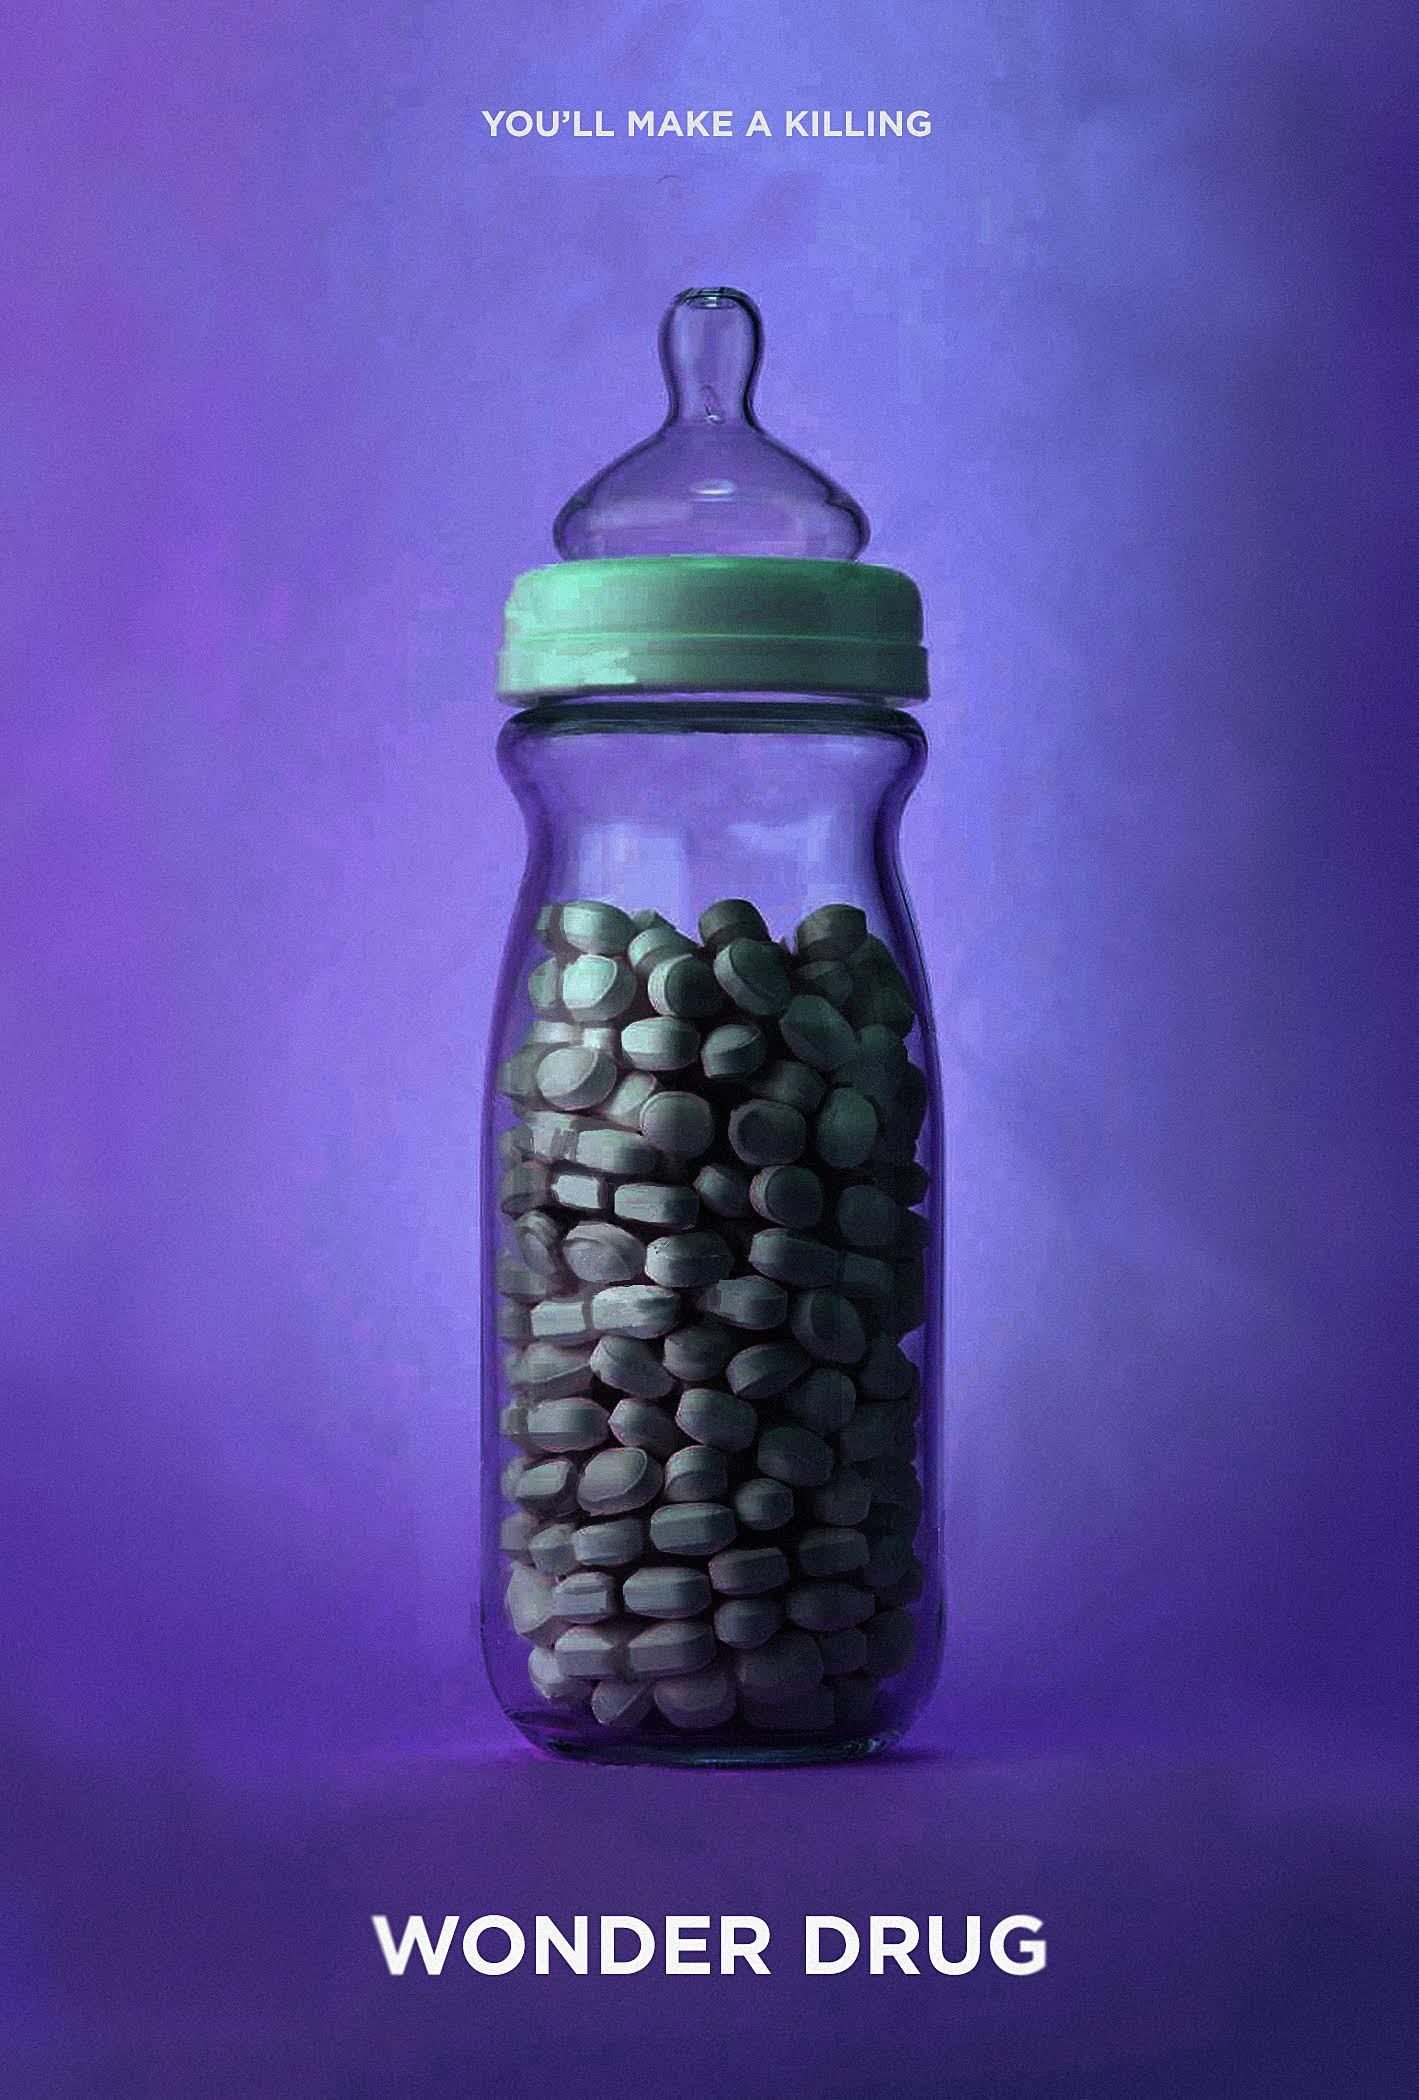 The Black List created a special poster to promote WONDER DRUG as a "Featured Script" on its website in 2018. Poster credit: Benjamin Finkel.